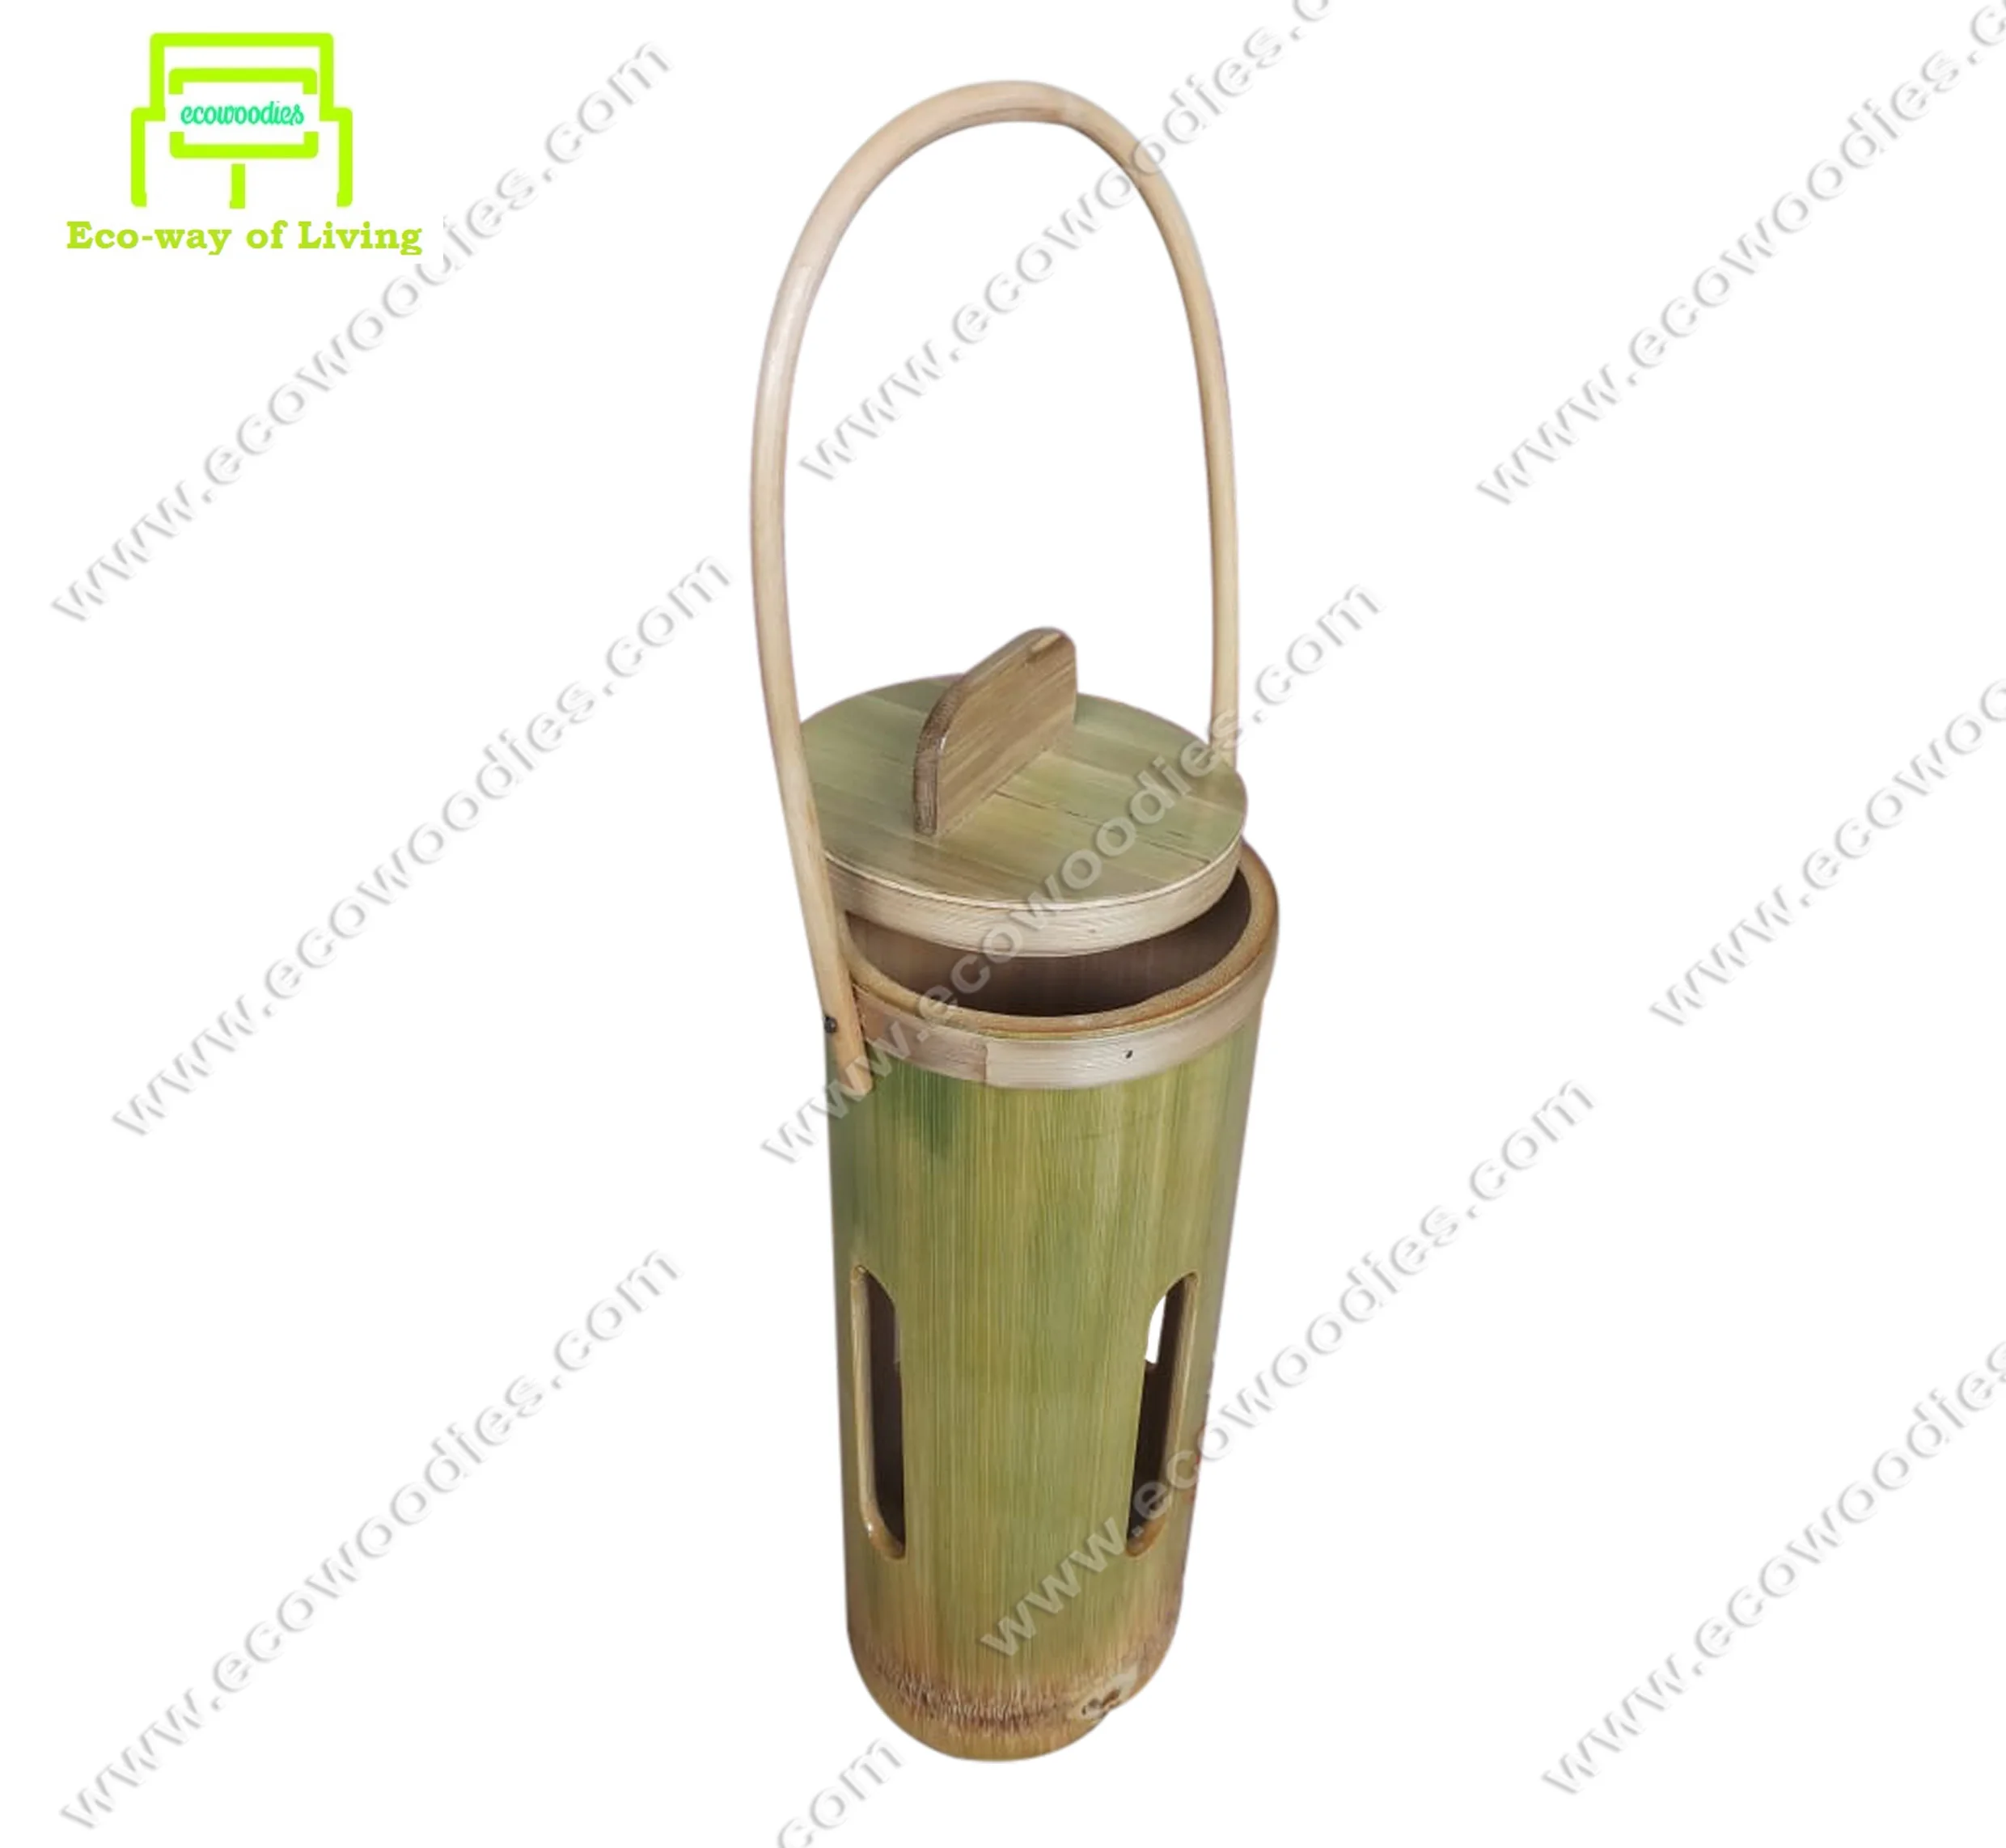 march expo 2020 top selling ceiling led lamp with lid can be used table top made from eco-friendly bamboo ideal for hotels house